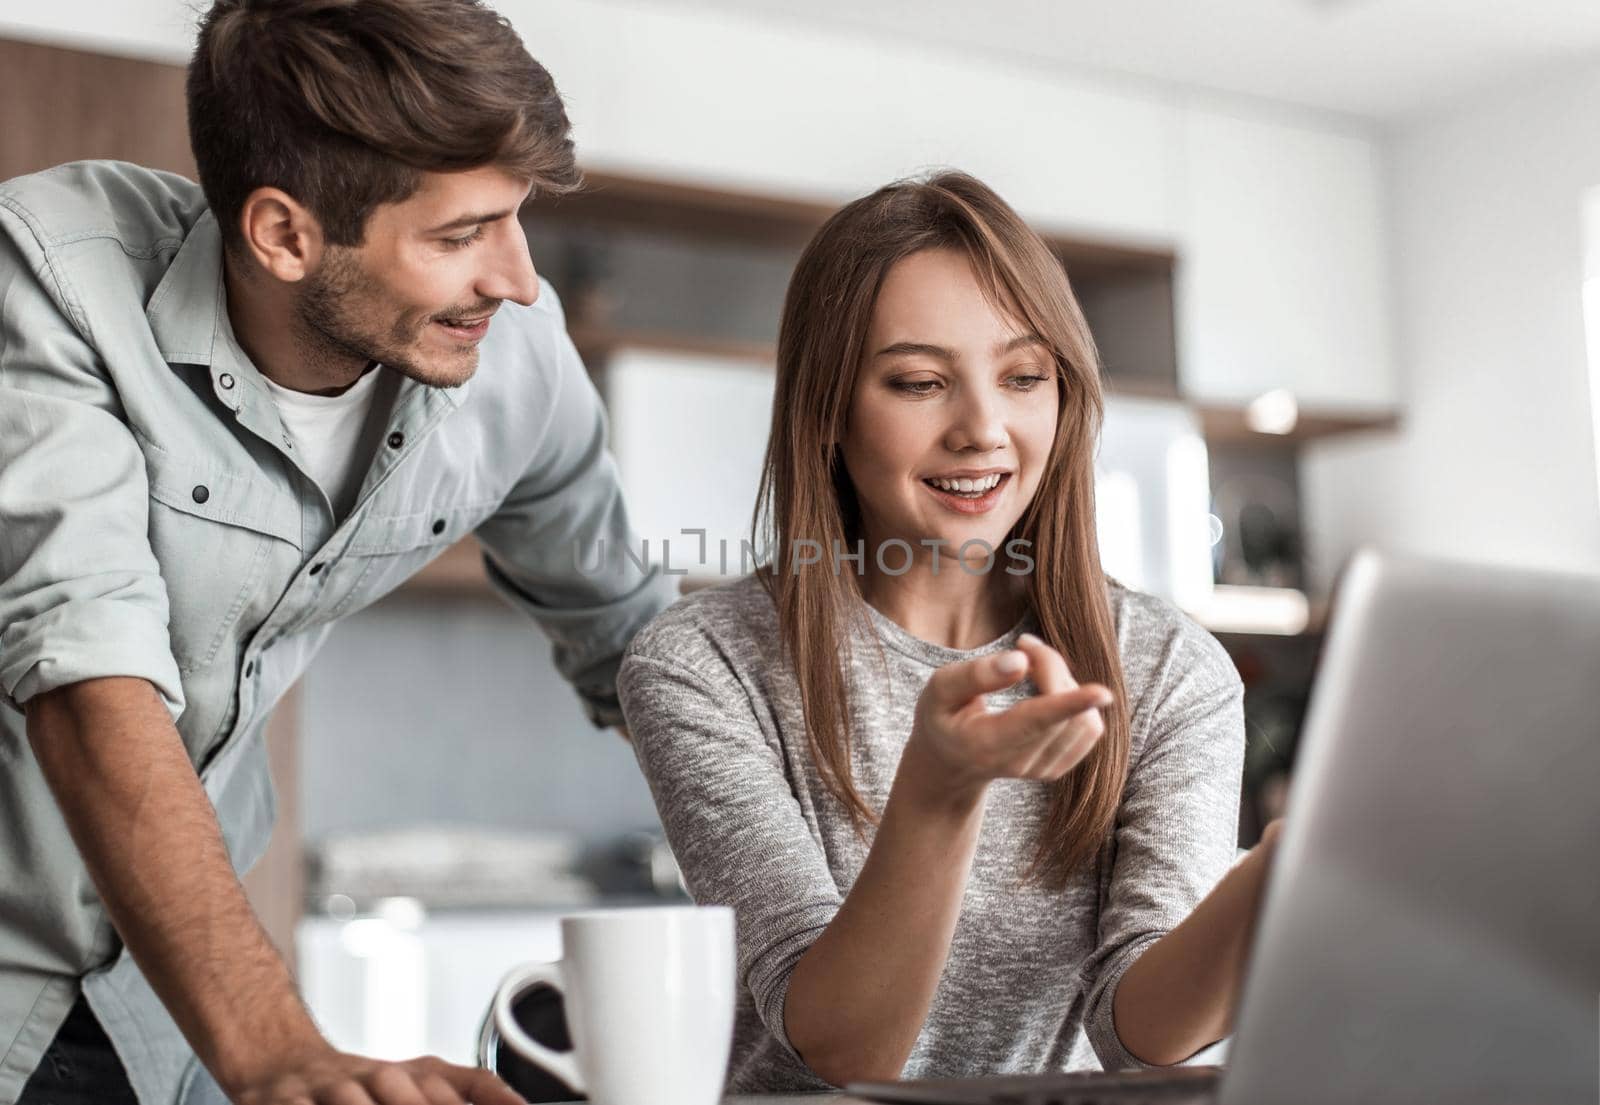 Cute couple using laptop together at home in the kitchen.people and technology